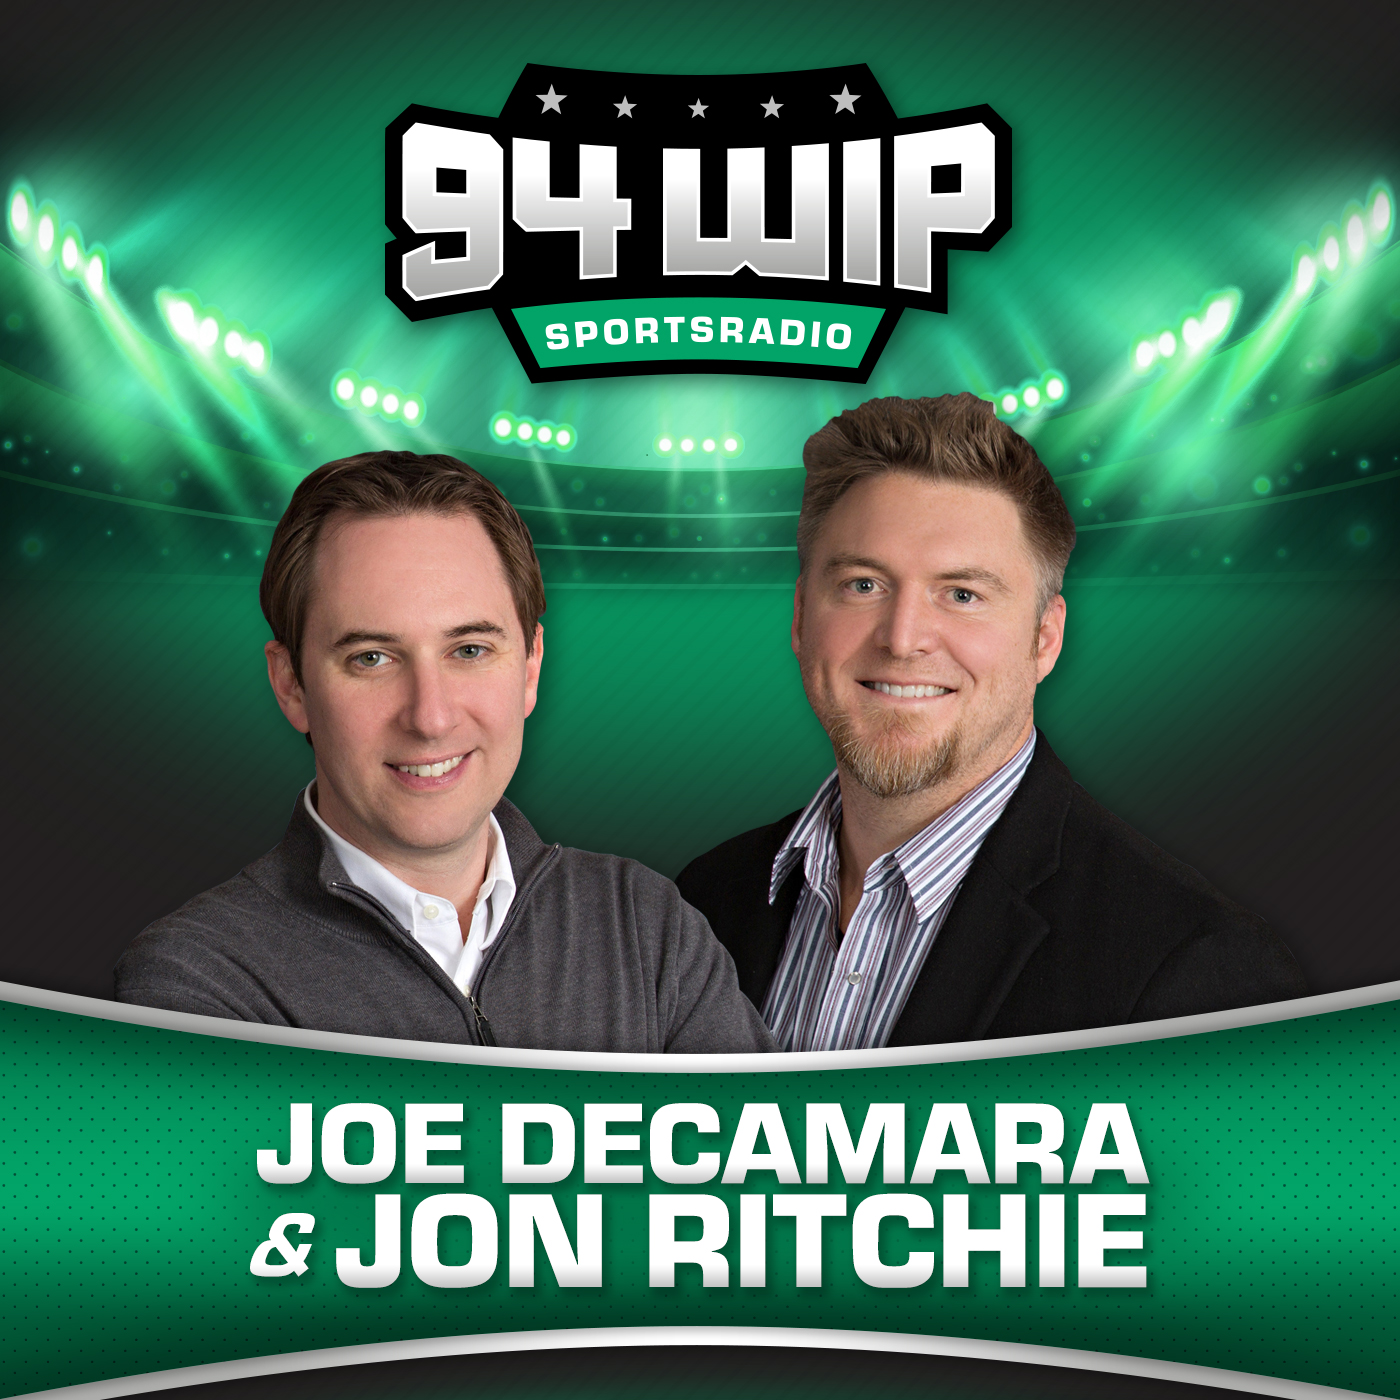 Who Replaces Joe DeCamara, Jon Ritchie, and James Seltzer on the 94 WIP Midday Show?